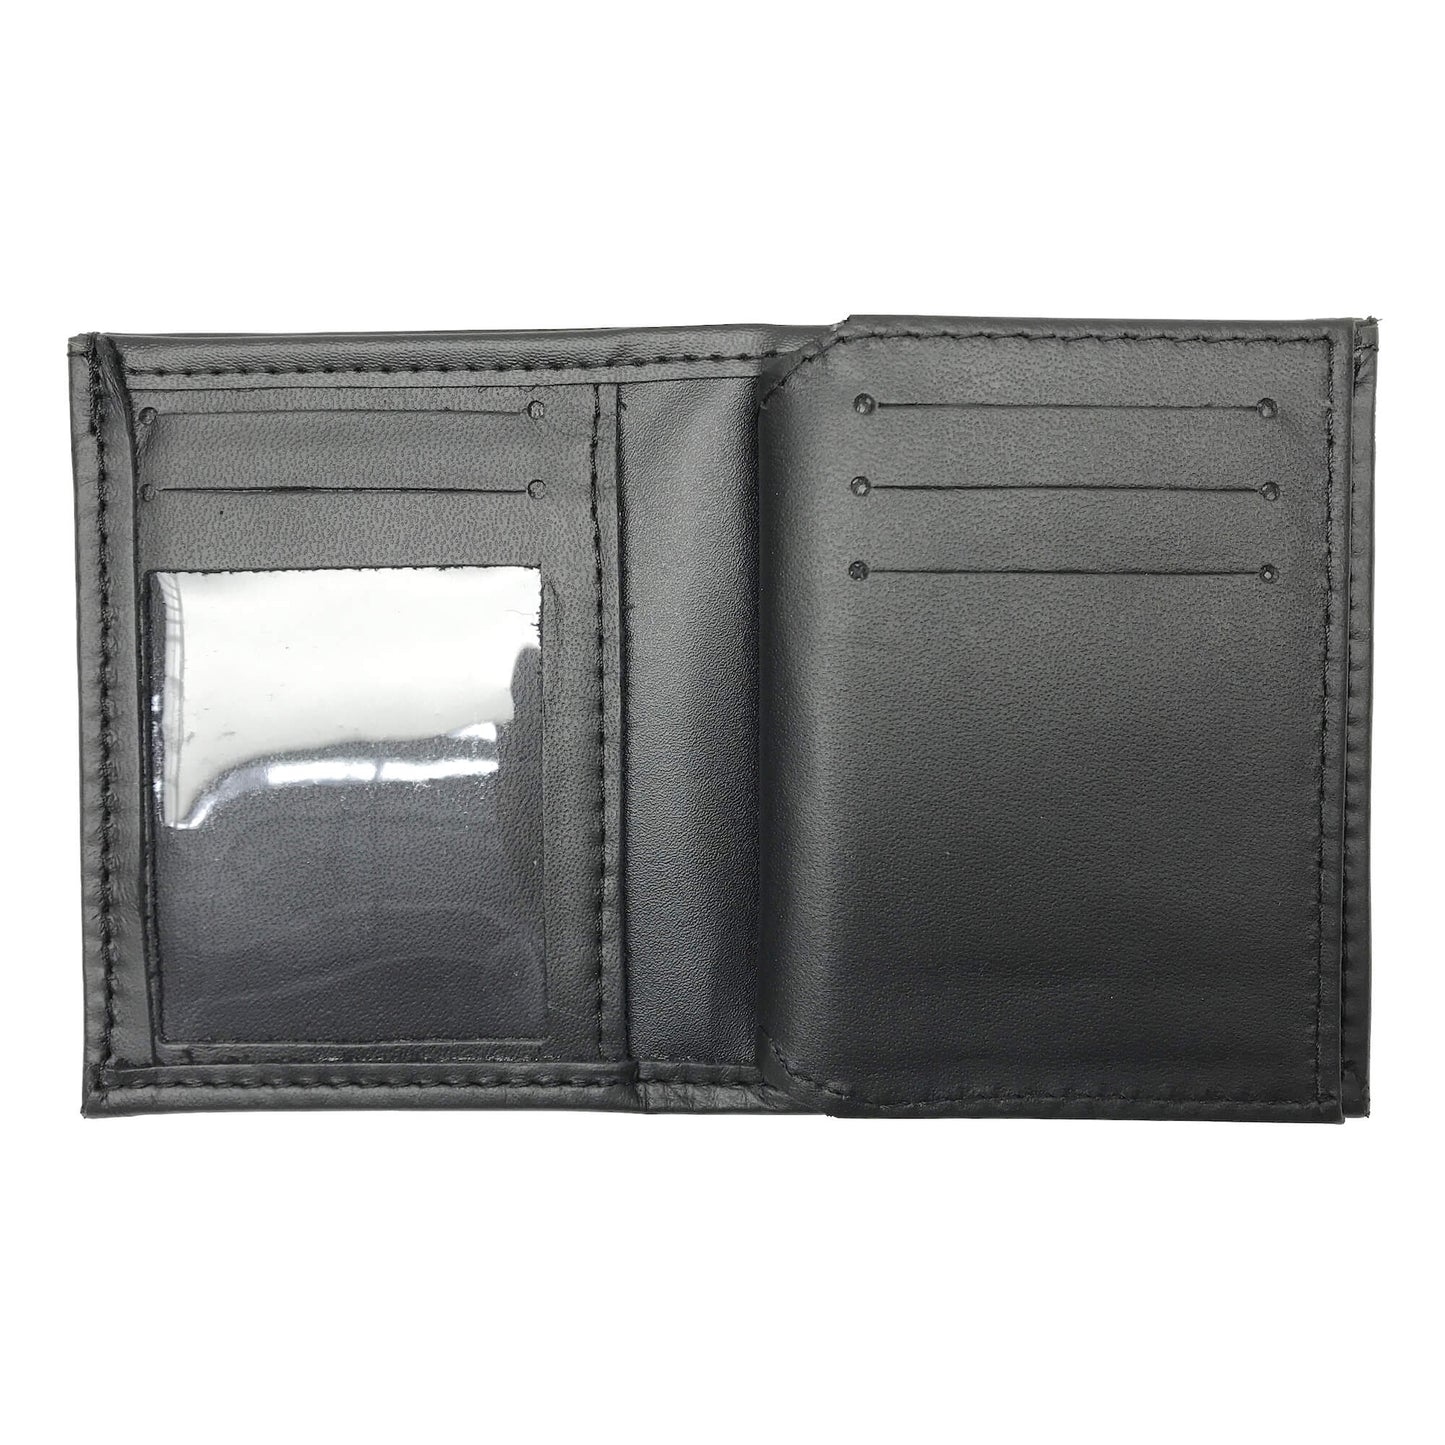 New York Police Department (NYPD) Lieutenant Bifold Hidden Badge Wallet-Perfect Fit-911 Duty Gear USA